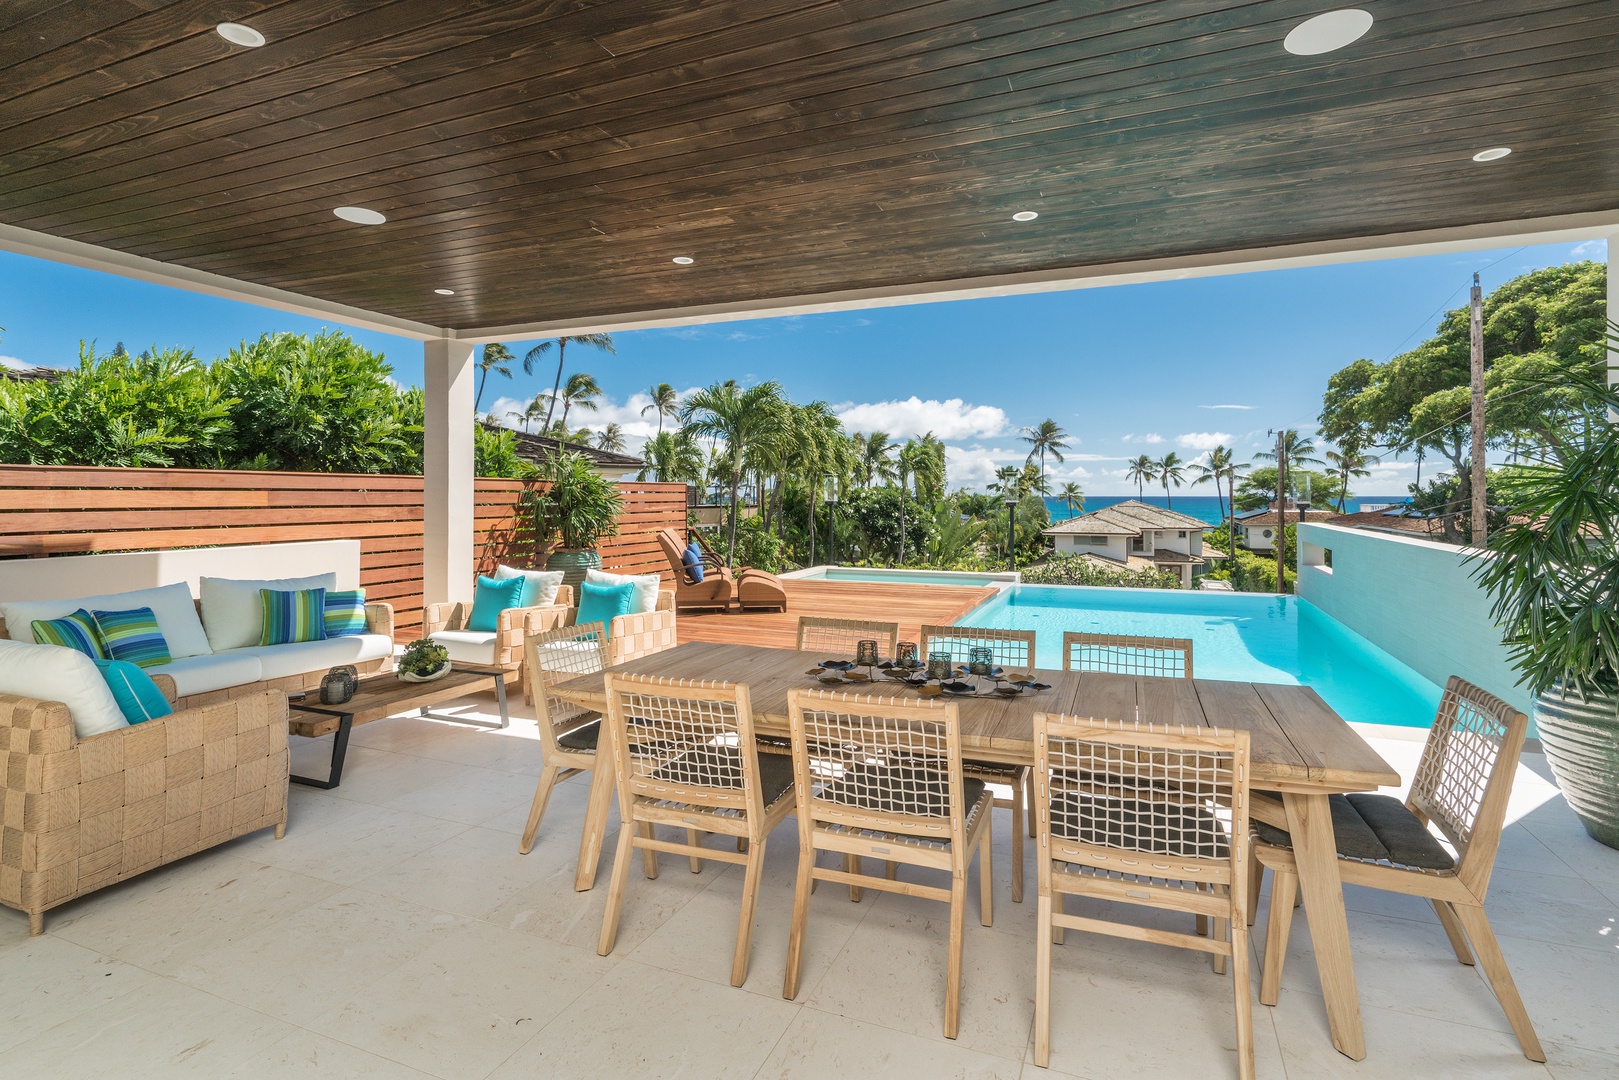 Honolulu Vacation Rentals, Diamond Head Grandeur - The covered lanai is the perfect place to hangout, complete with pool and ocean views